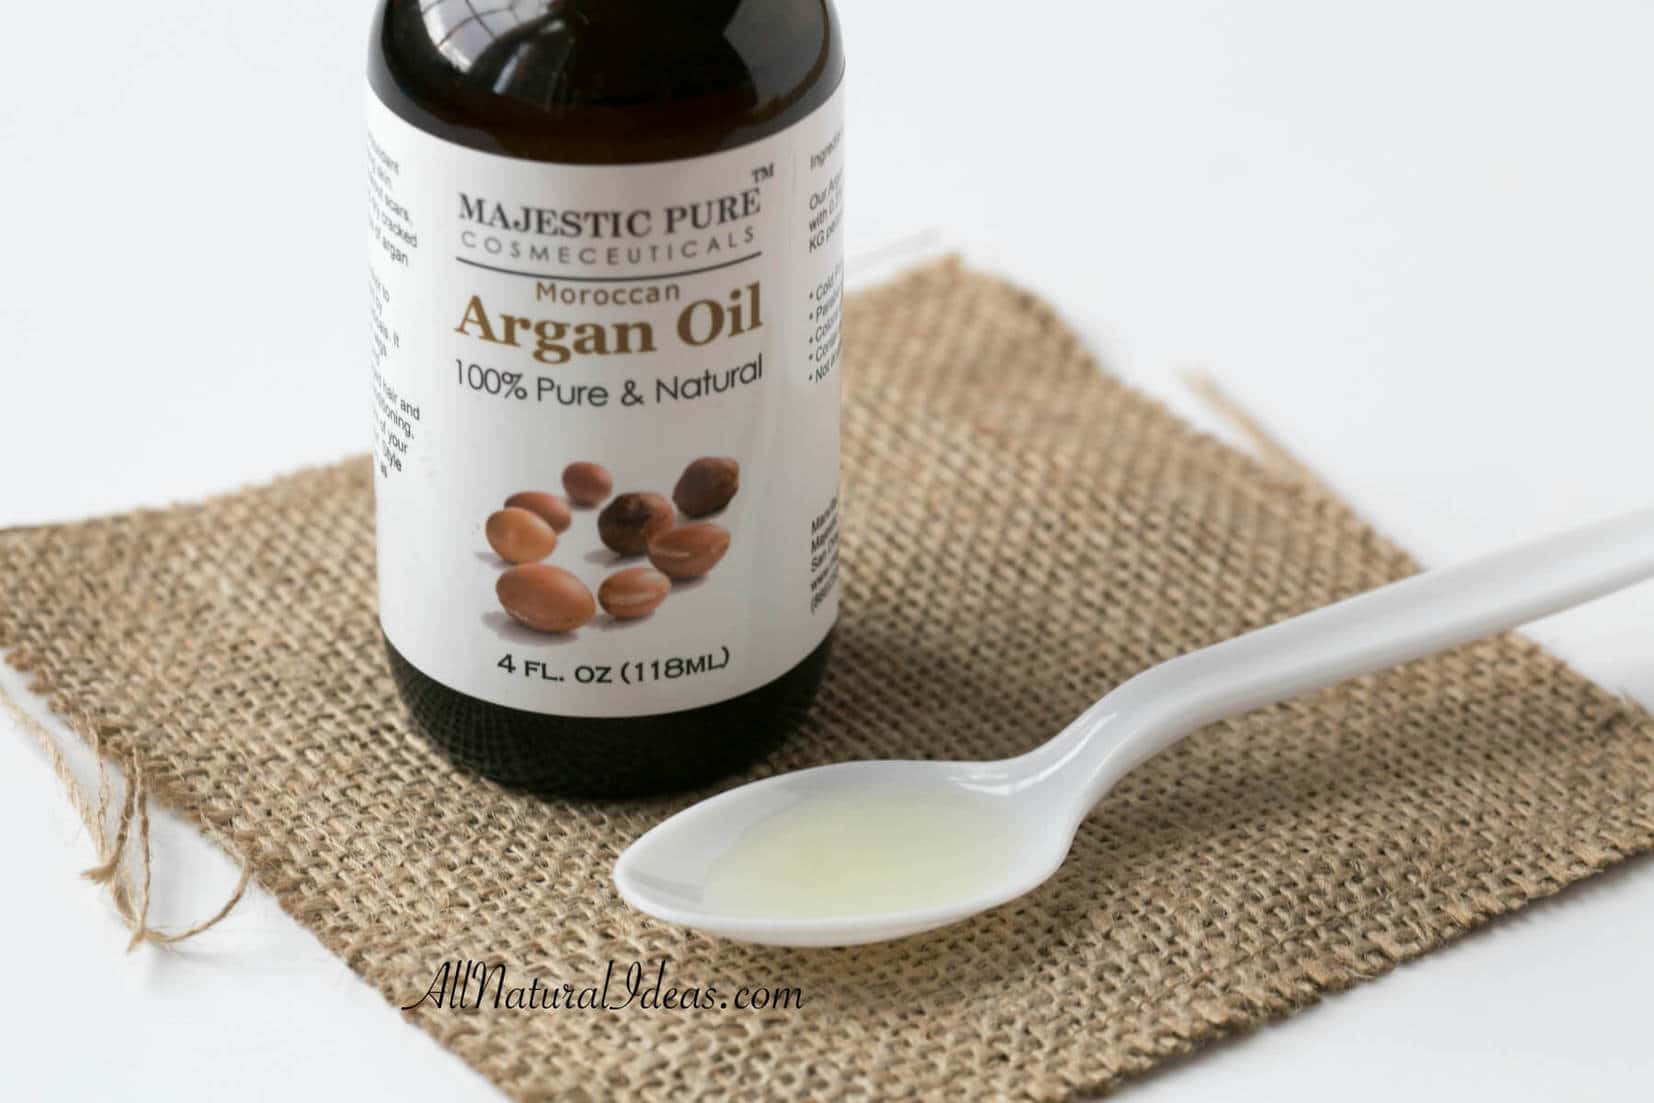 It's becoming popular to use argan oil for skin and hair worldwide. Regular use of argan oil is sure to make your skin and hair more youthful and healthier.